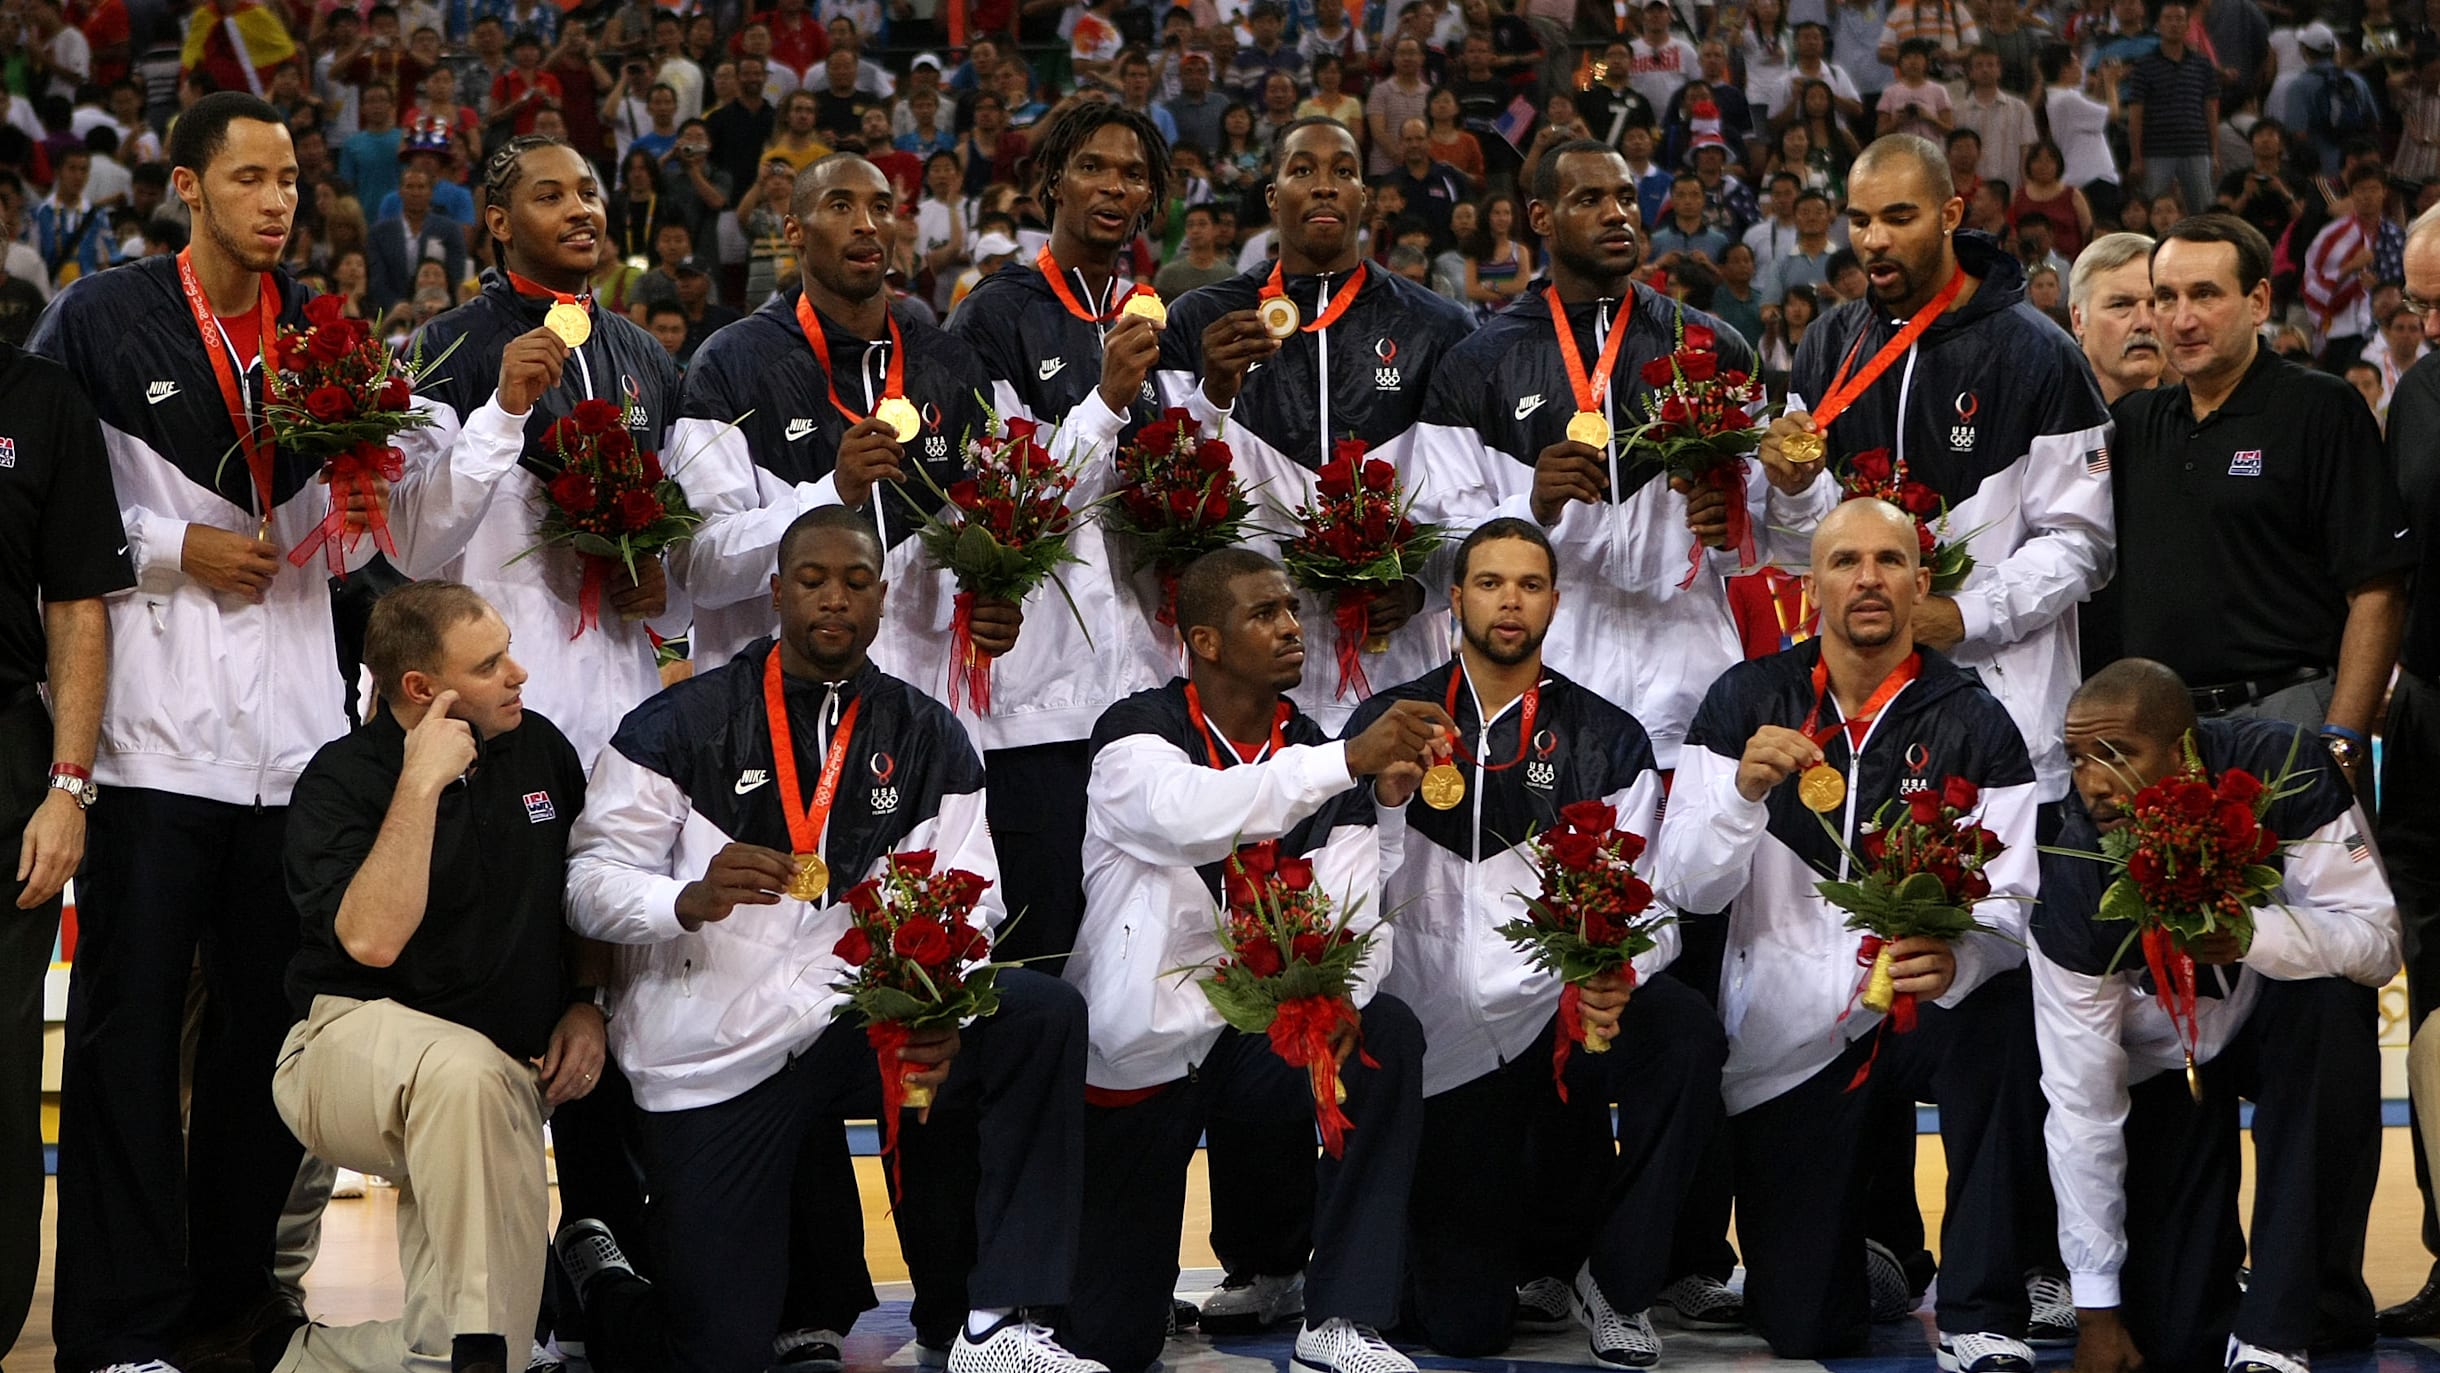 The Redeem Team 2008: Bios of all U.S. players in their quest for redemption at Beijing 2008